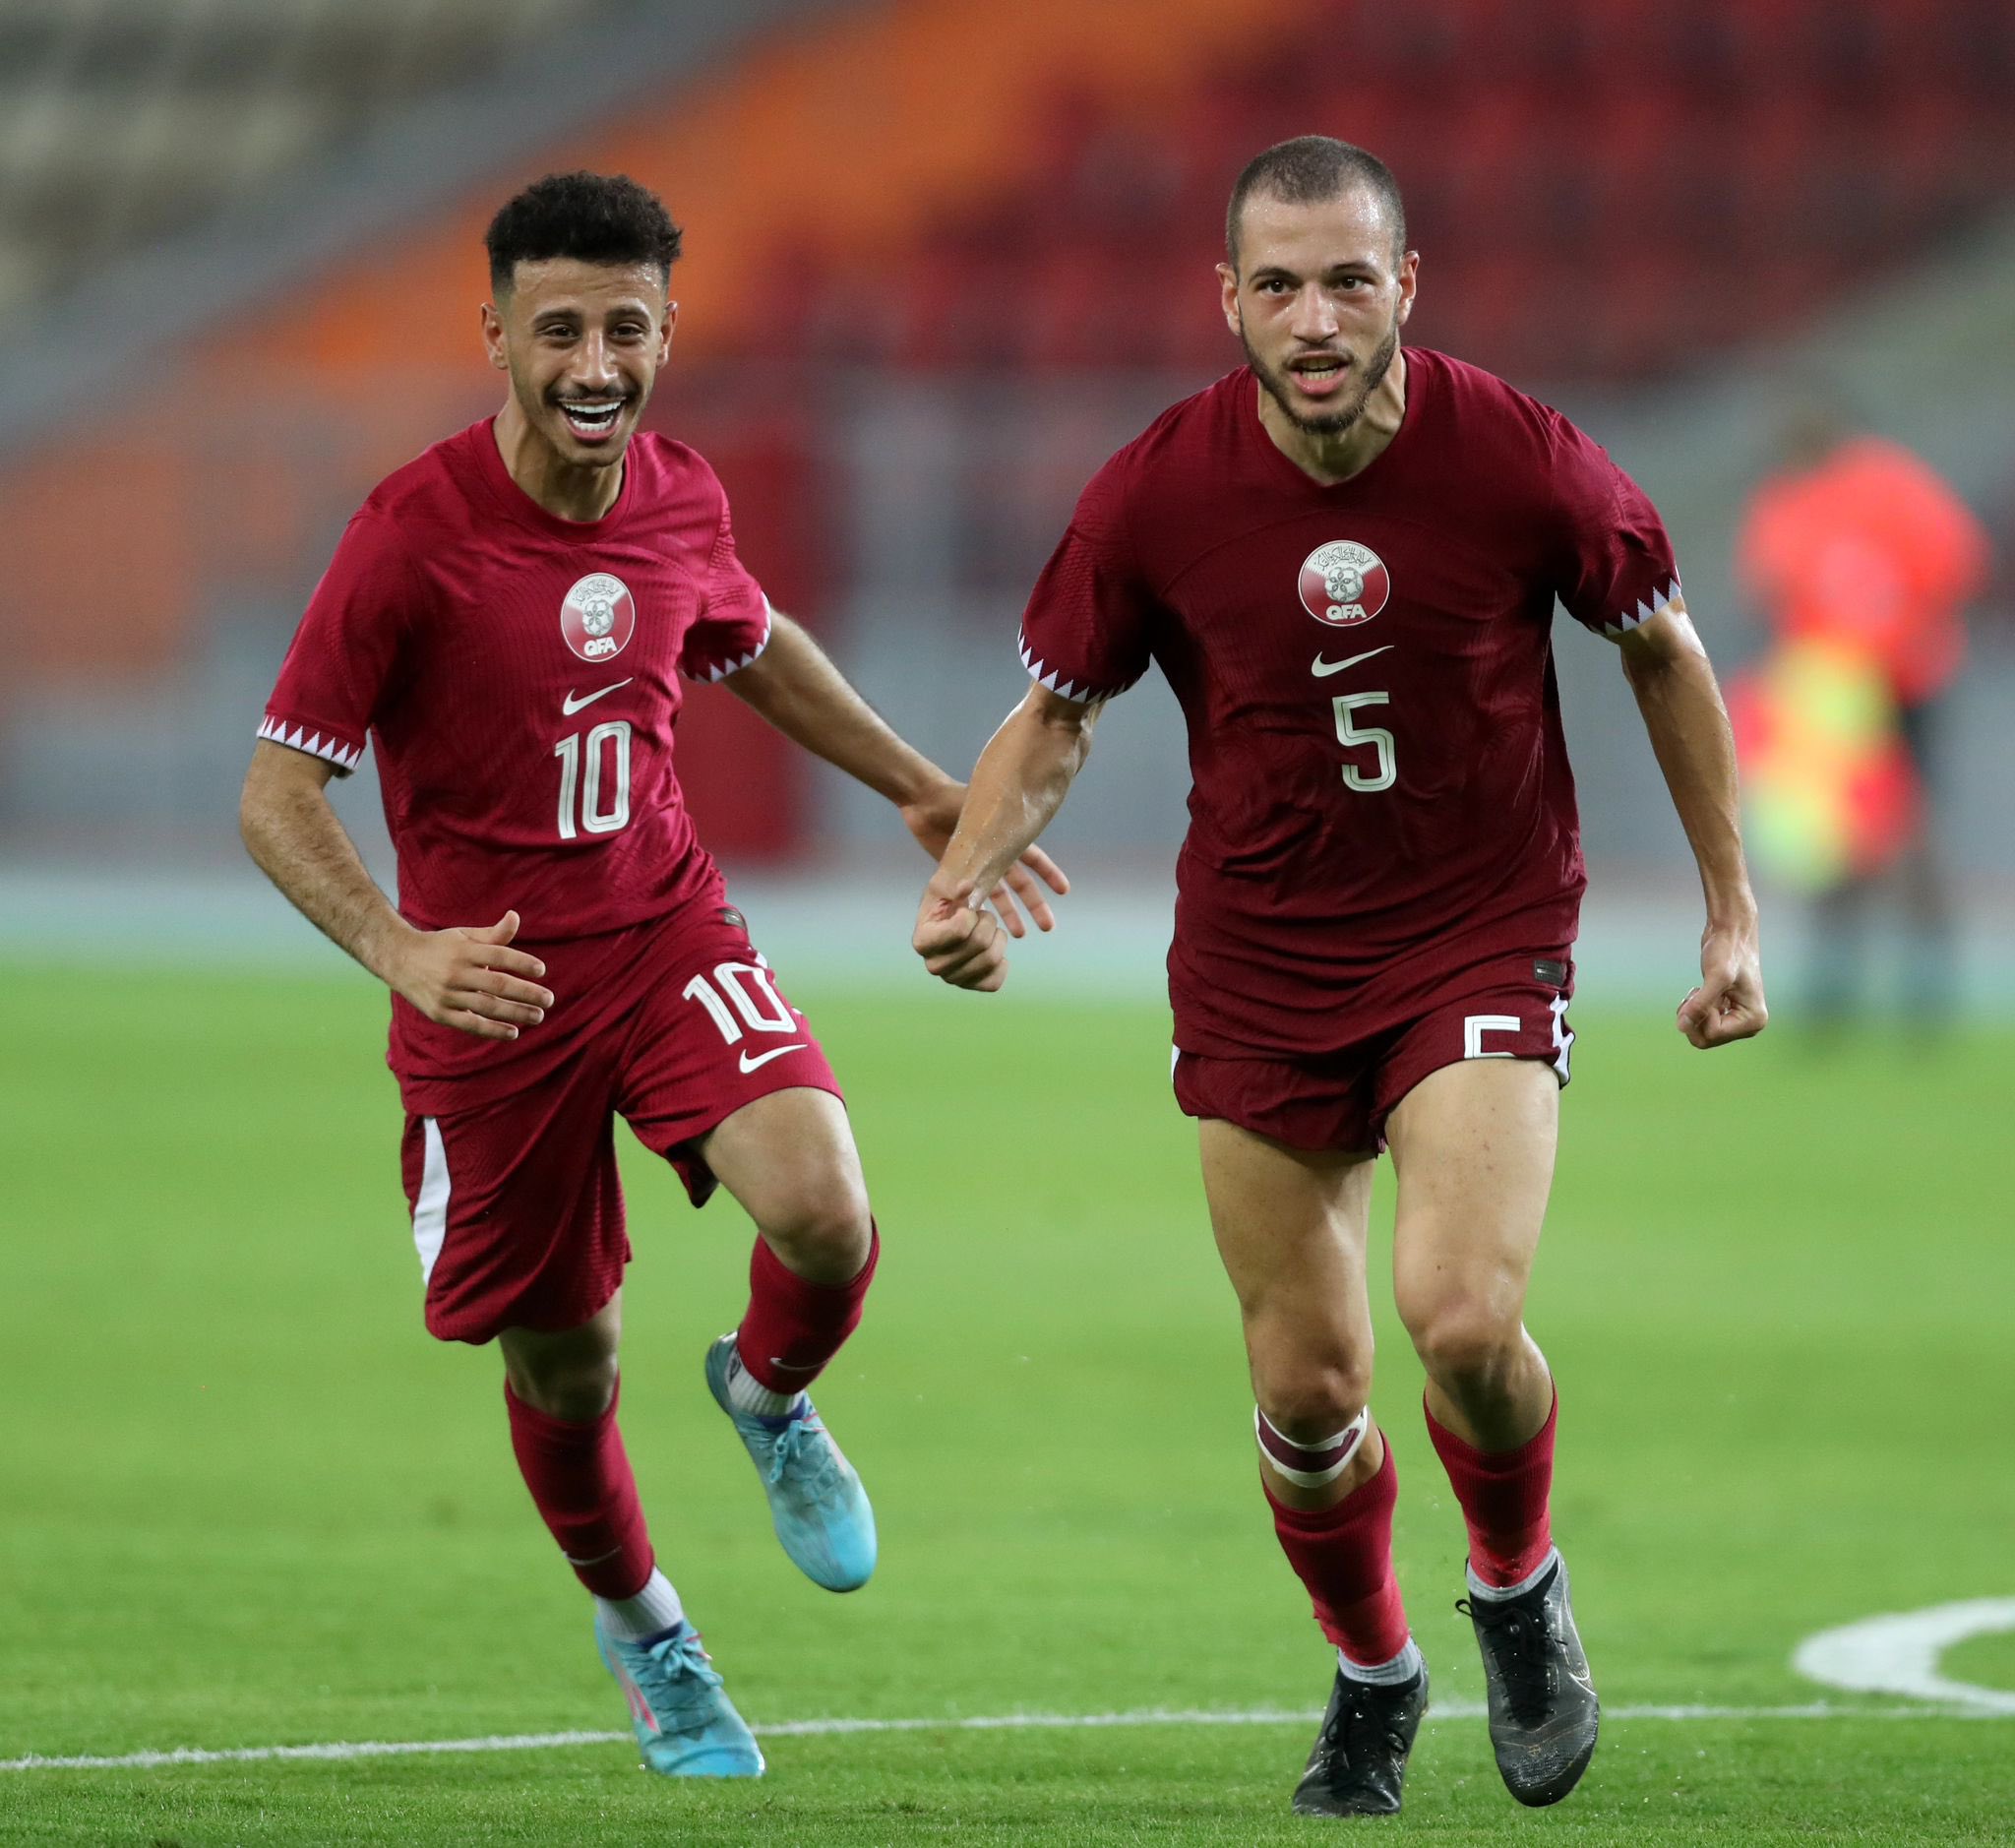 Qatar Full of Determination as it Embarks on Historic World Cup Challenge